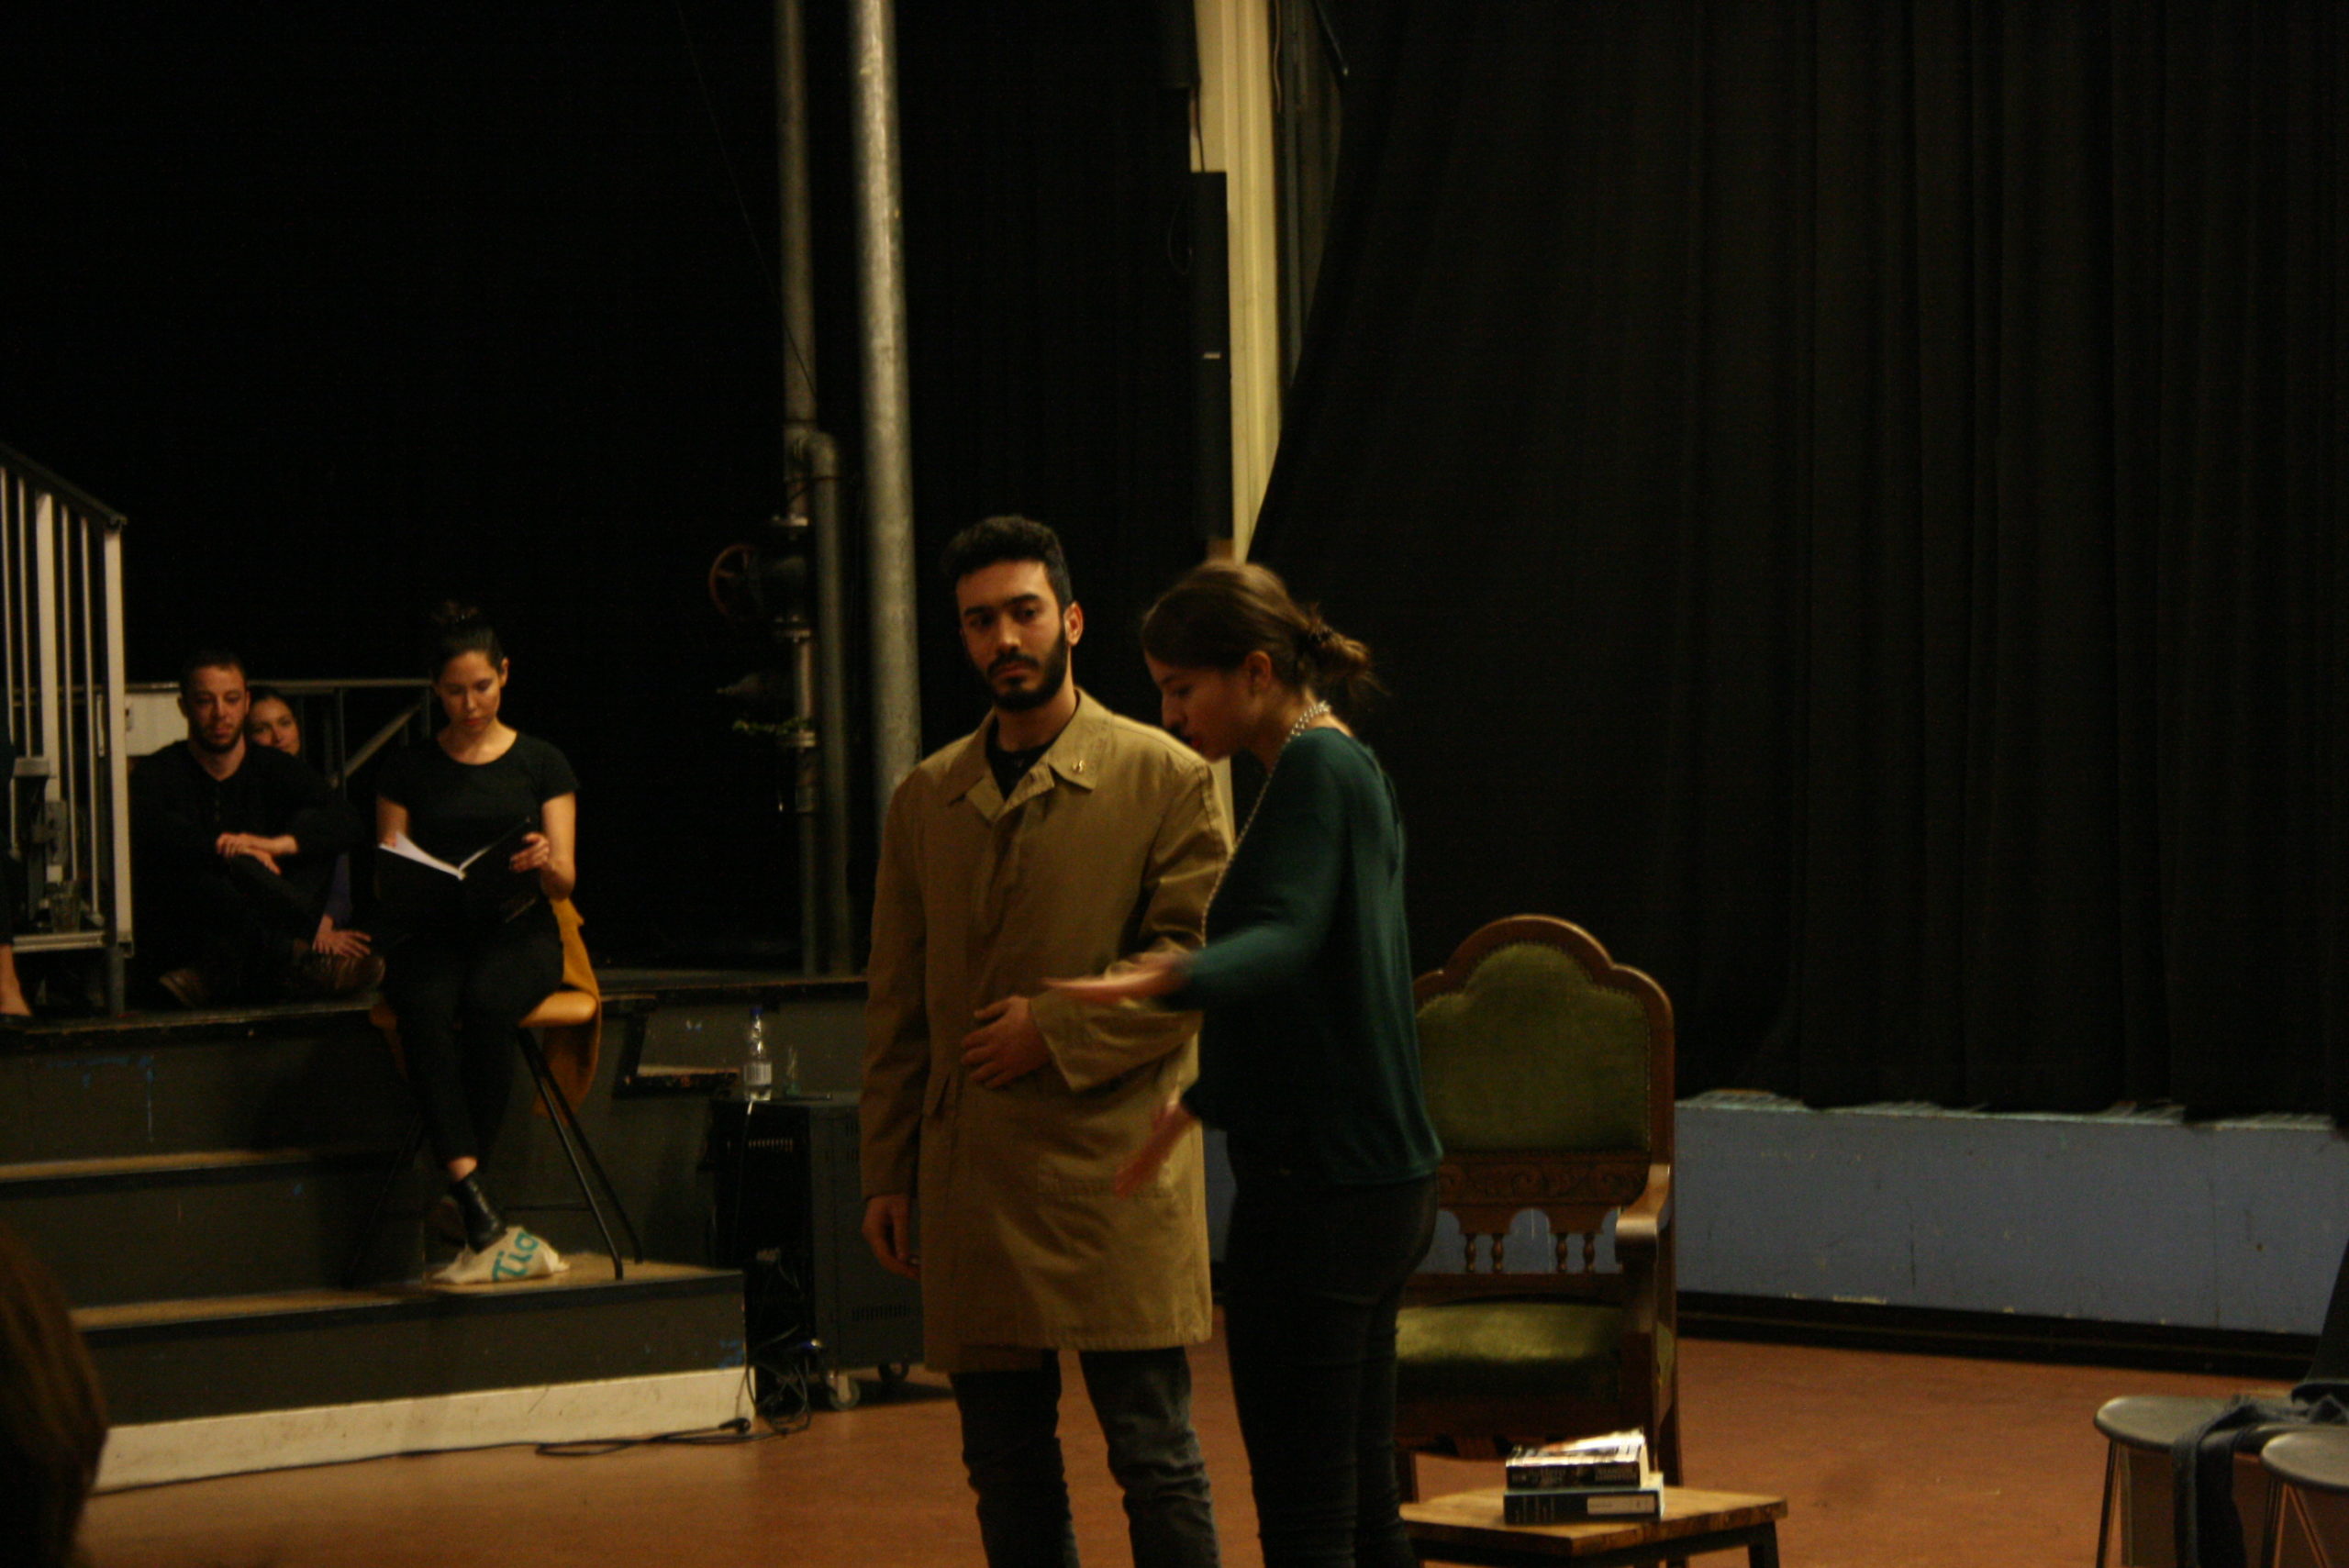 Photo from the show "Skin of our Teeth". Two actors are on stage, one dressed like a 1920s madame speaking to a man wearing a beige half-long coat